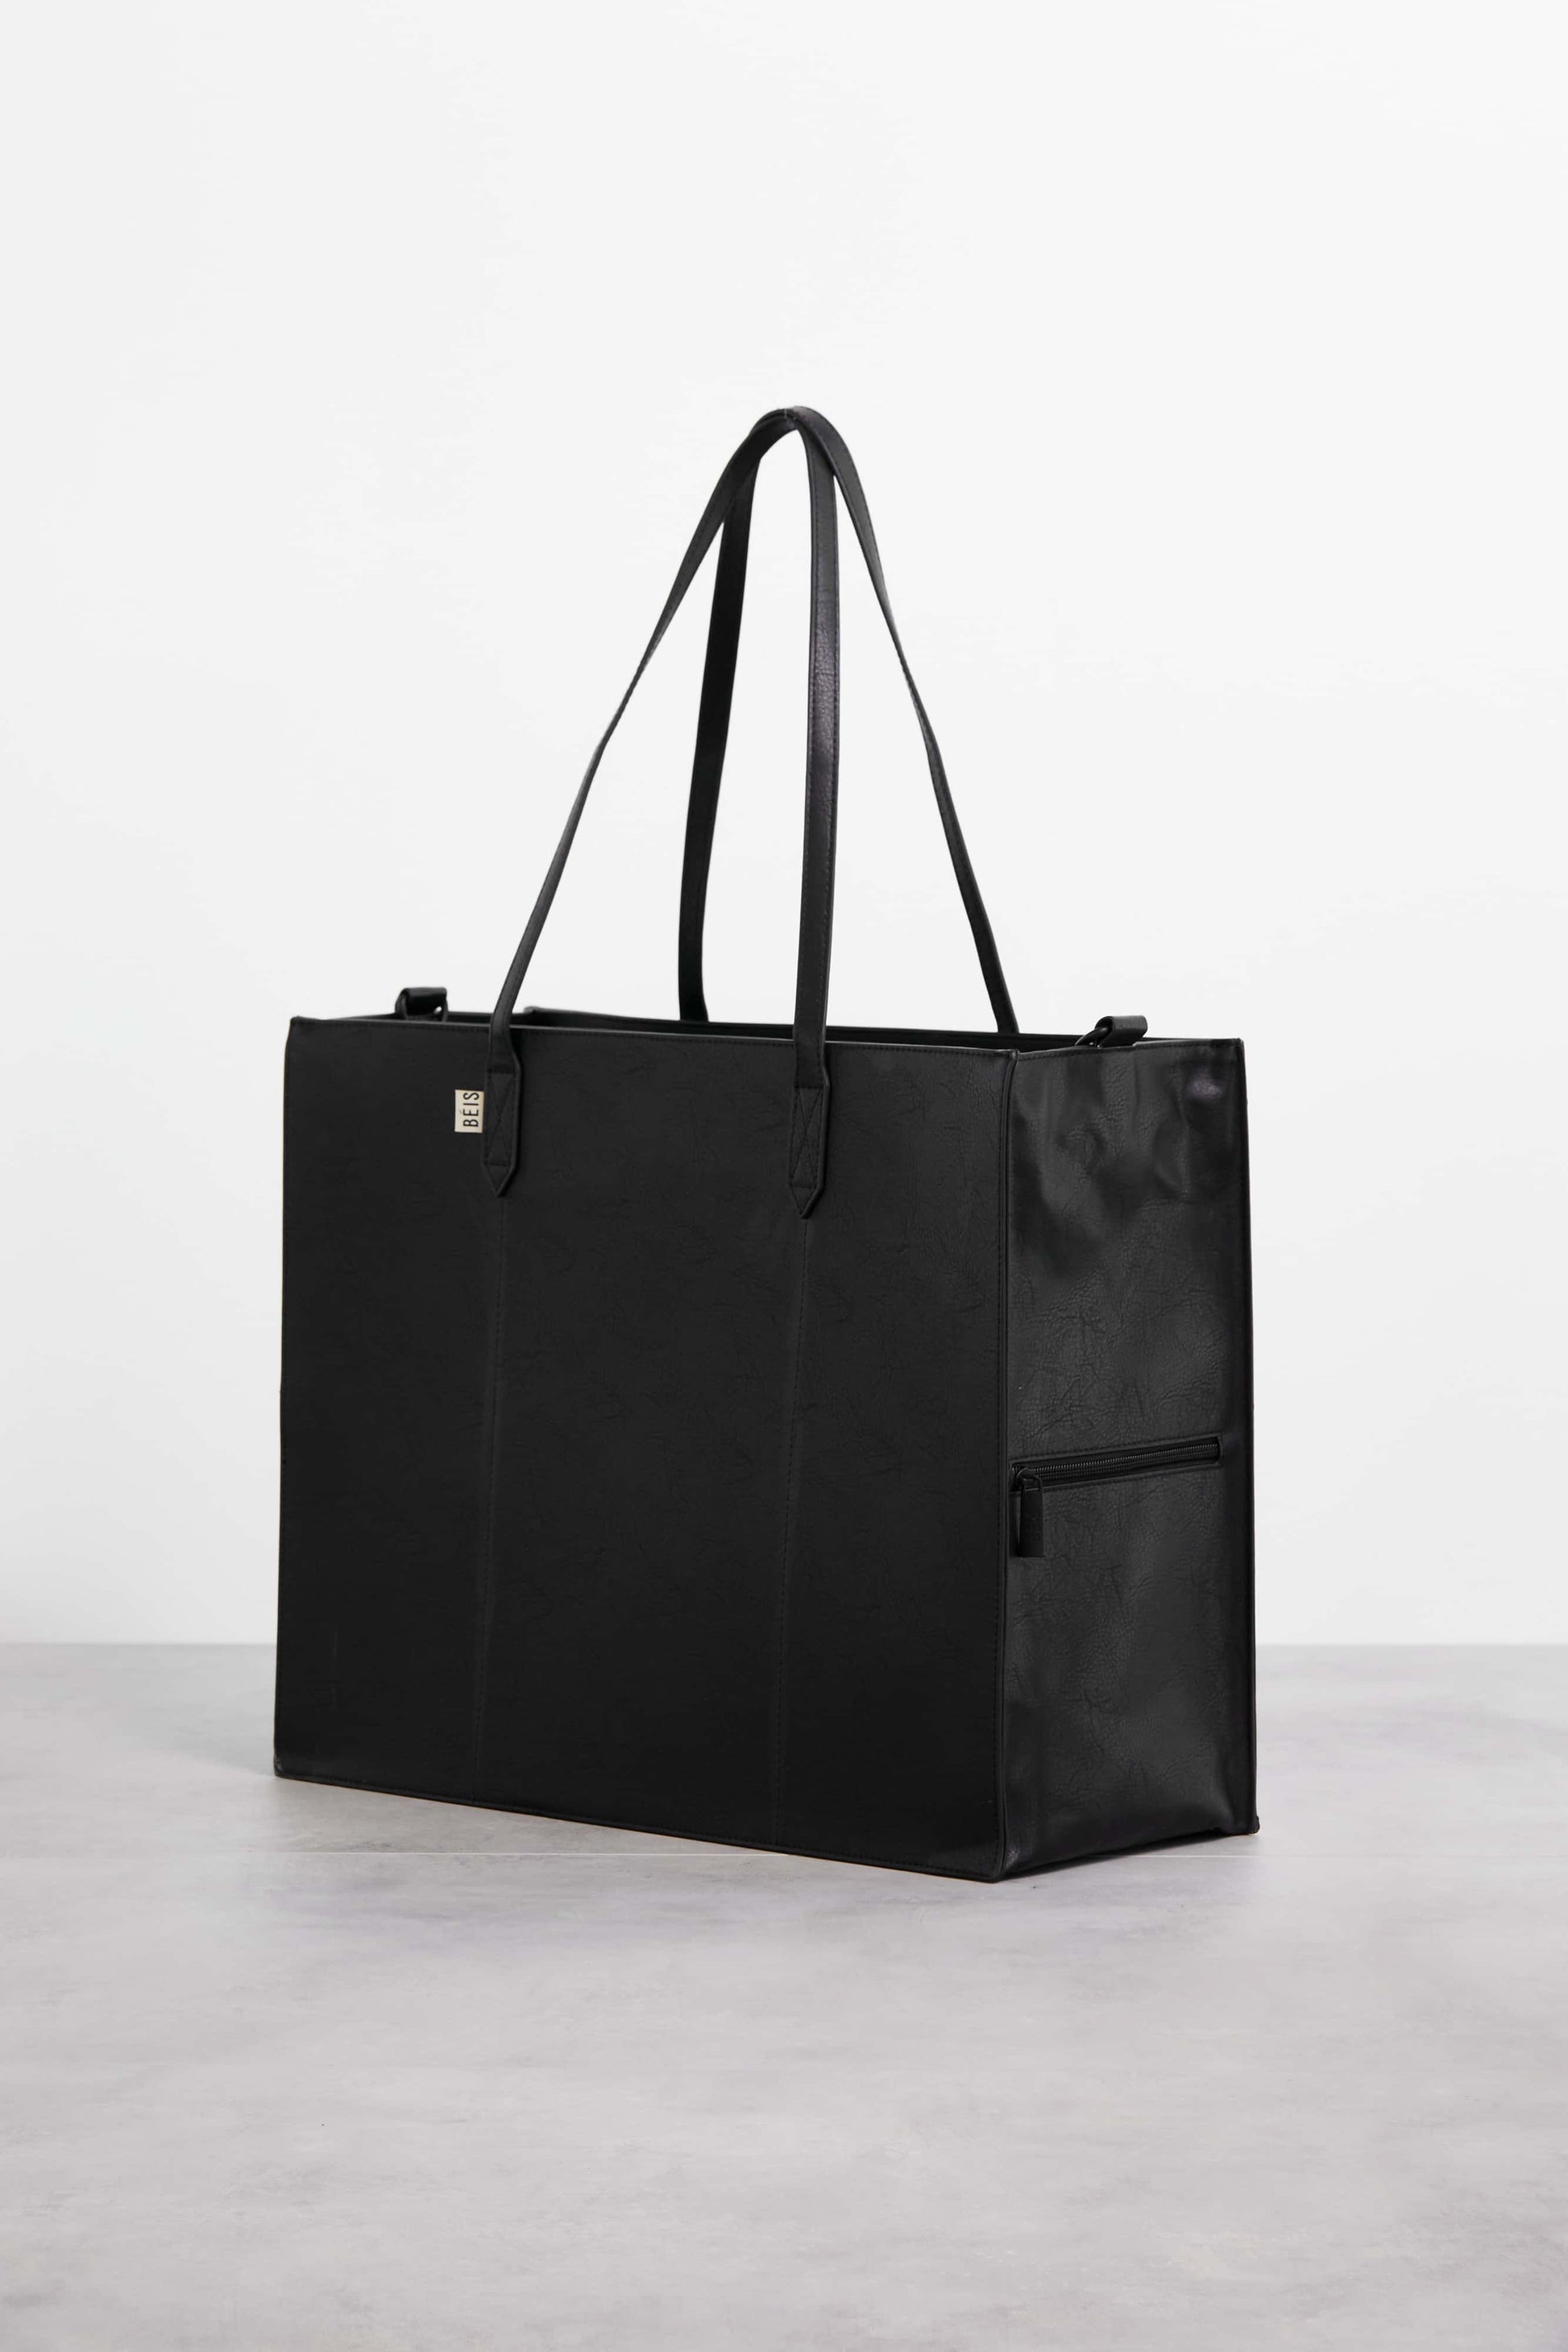 Bring 'er tote bag with bottle compartments